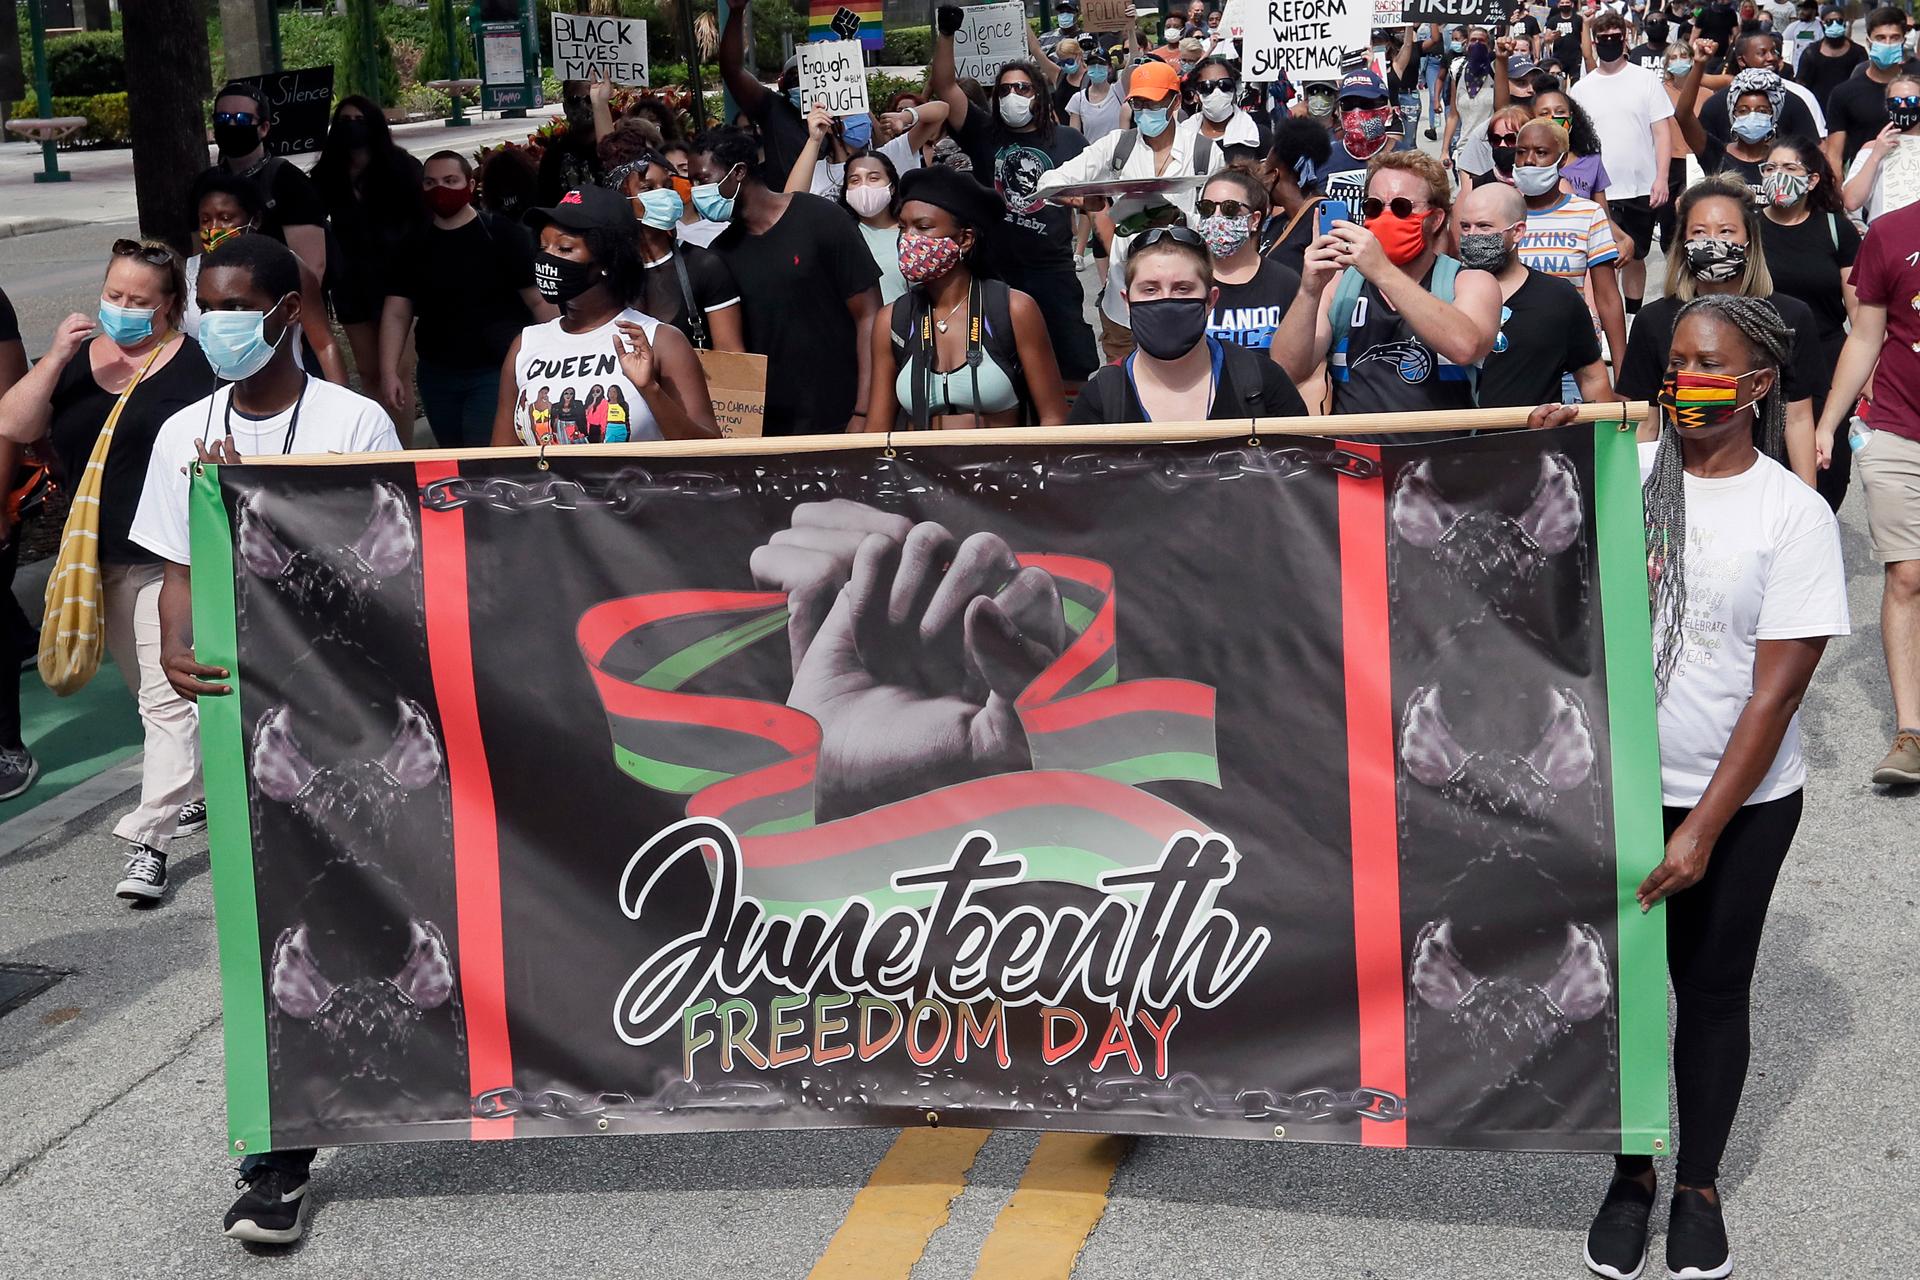 Demonstrators march through downtown Orlando, Florida, during a Juneteenth event, June 19, 2020.